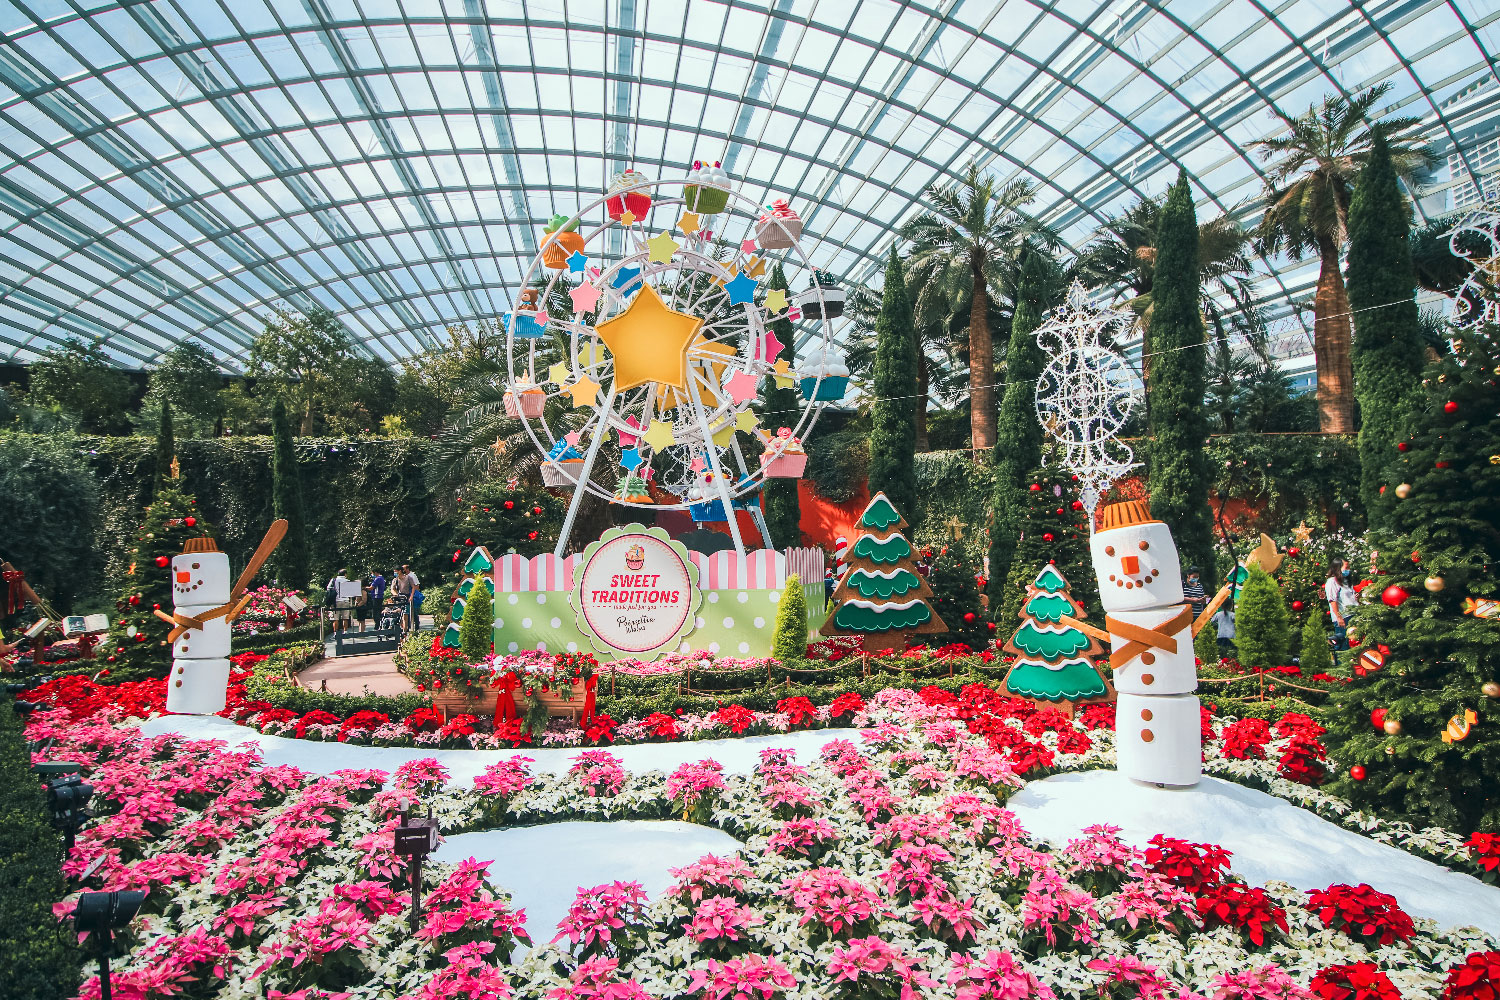 Poinsettia Wishes Floral Display at Gardens by the Bay